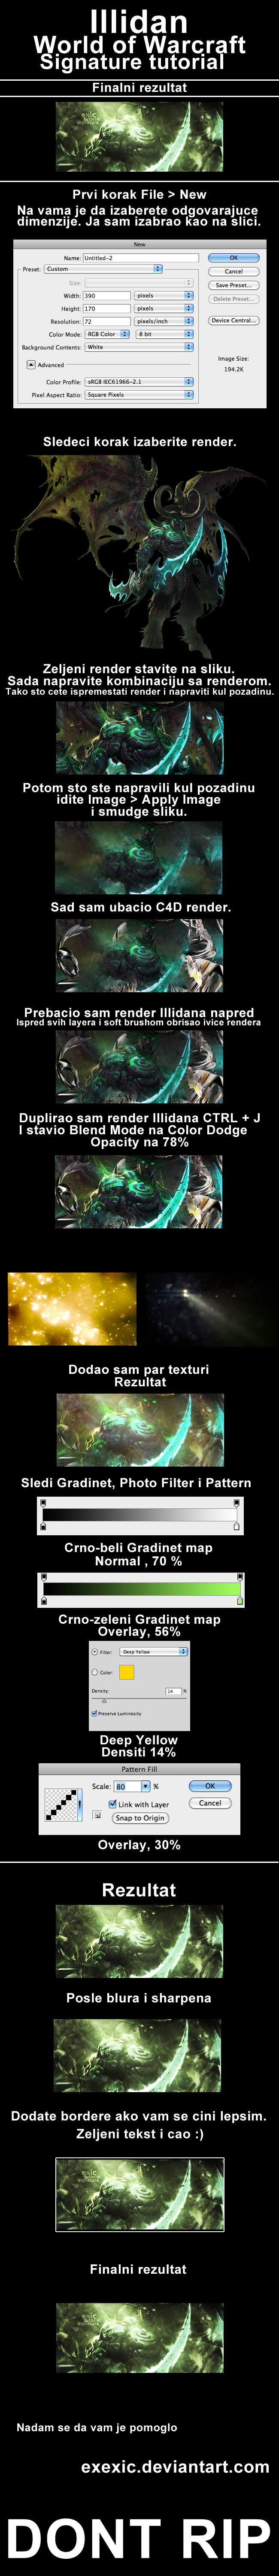 [Image: illidan_signature_tutorial_by_exexic-d3gvls4.png]